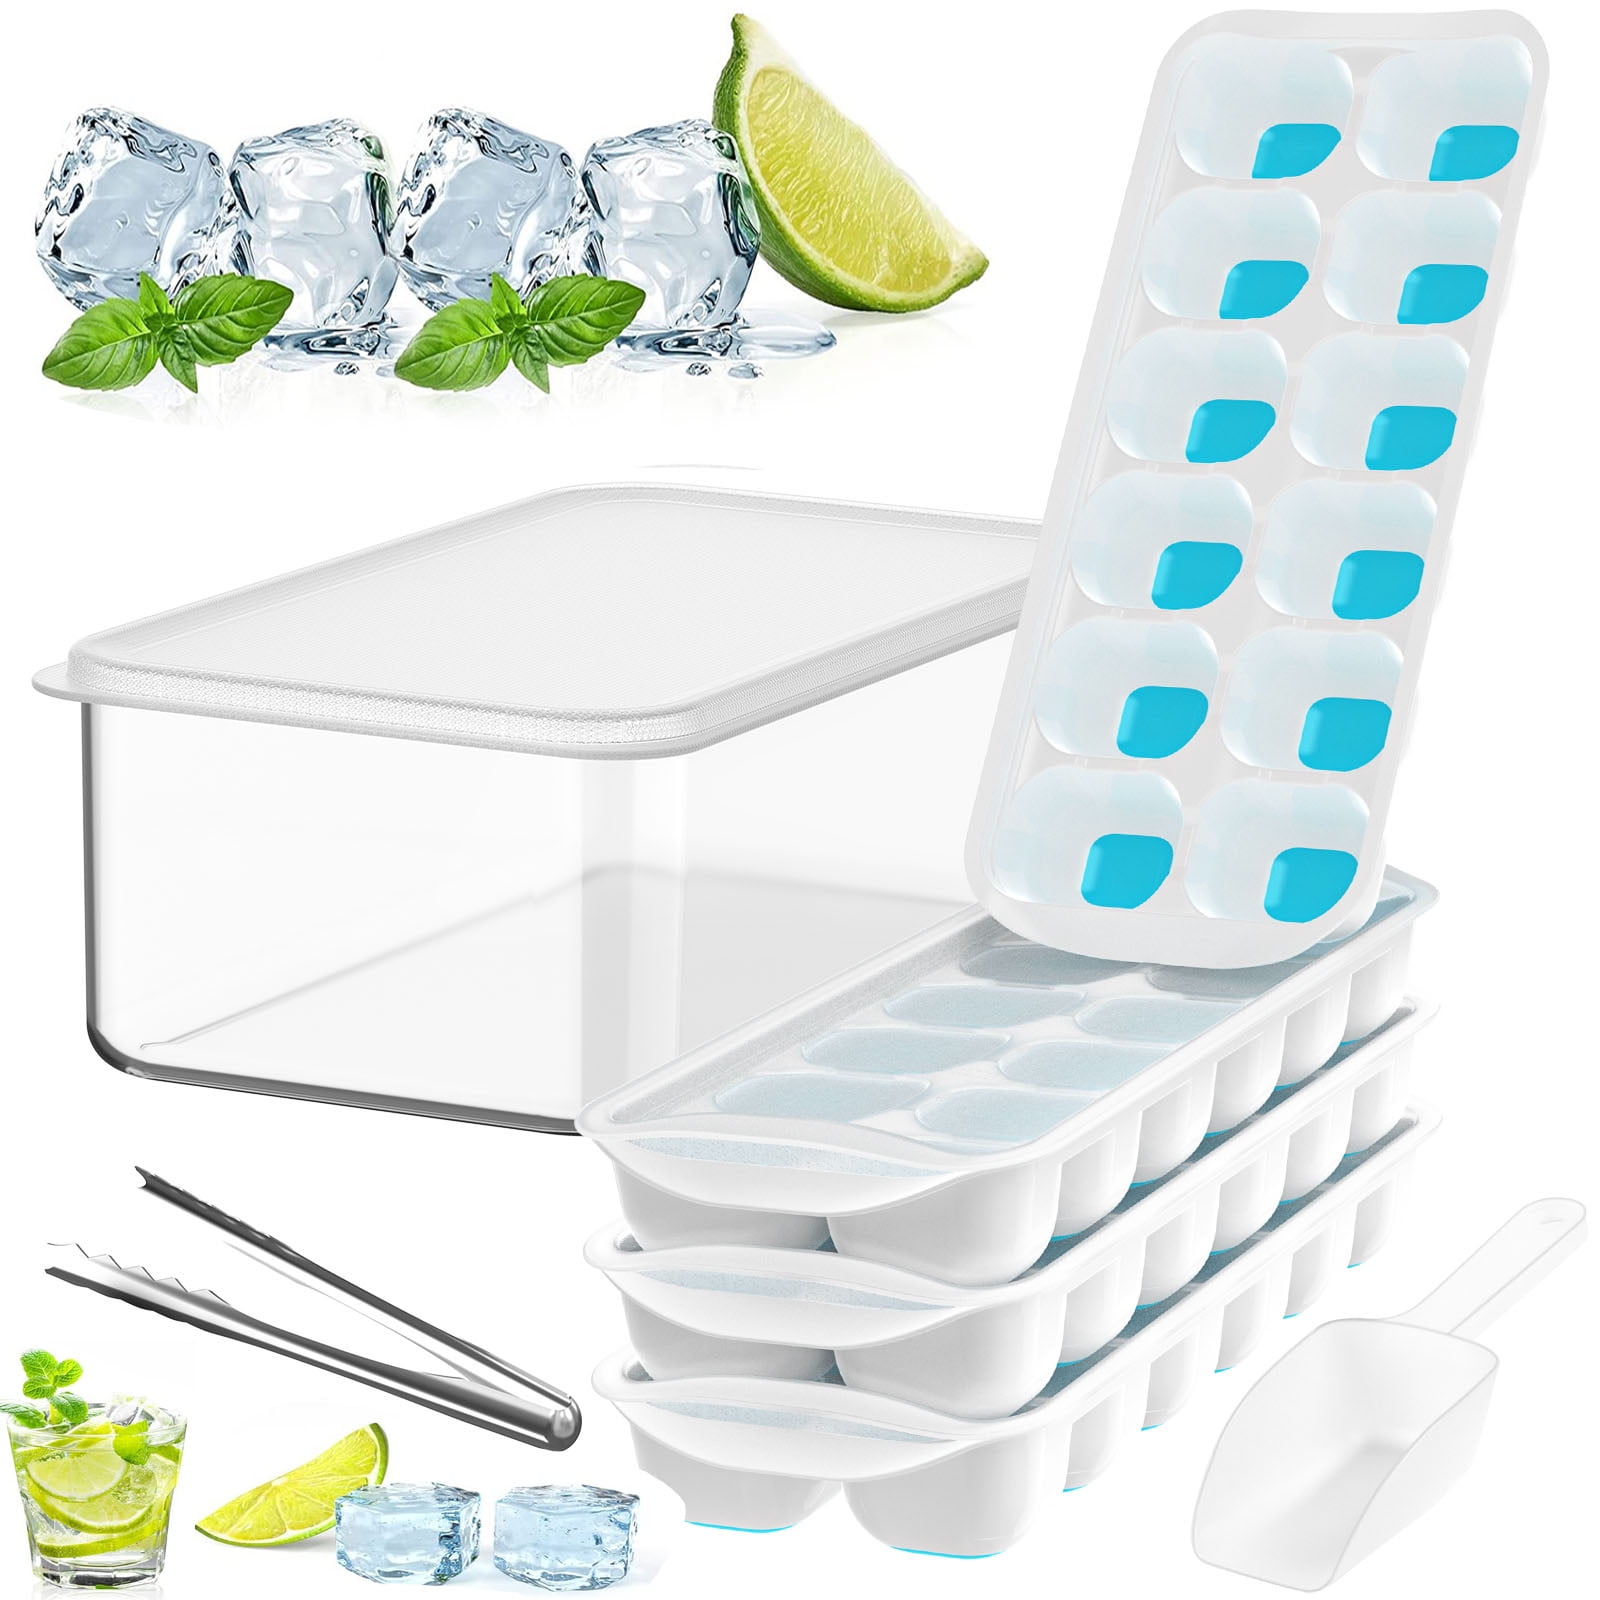  ICEXXP 4 Pack Ice Cube Tray with Lid and Bin, Ice Cube Trays  for Freezer with Ice Box, Silicone Ice Trays with Ice Container for  Cocktails, Stackable Ice Tray with Storage